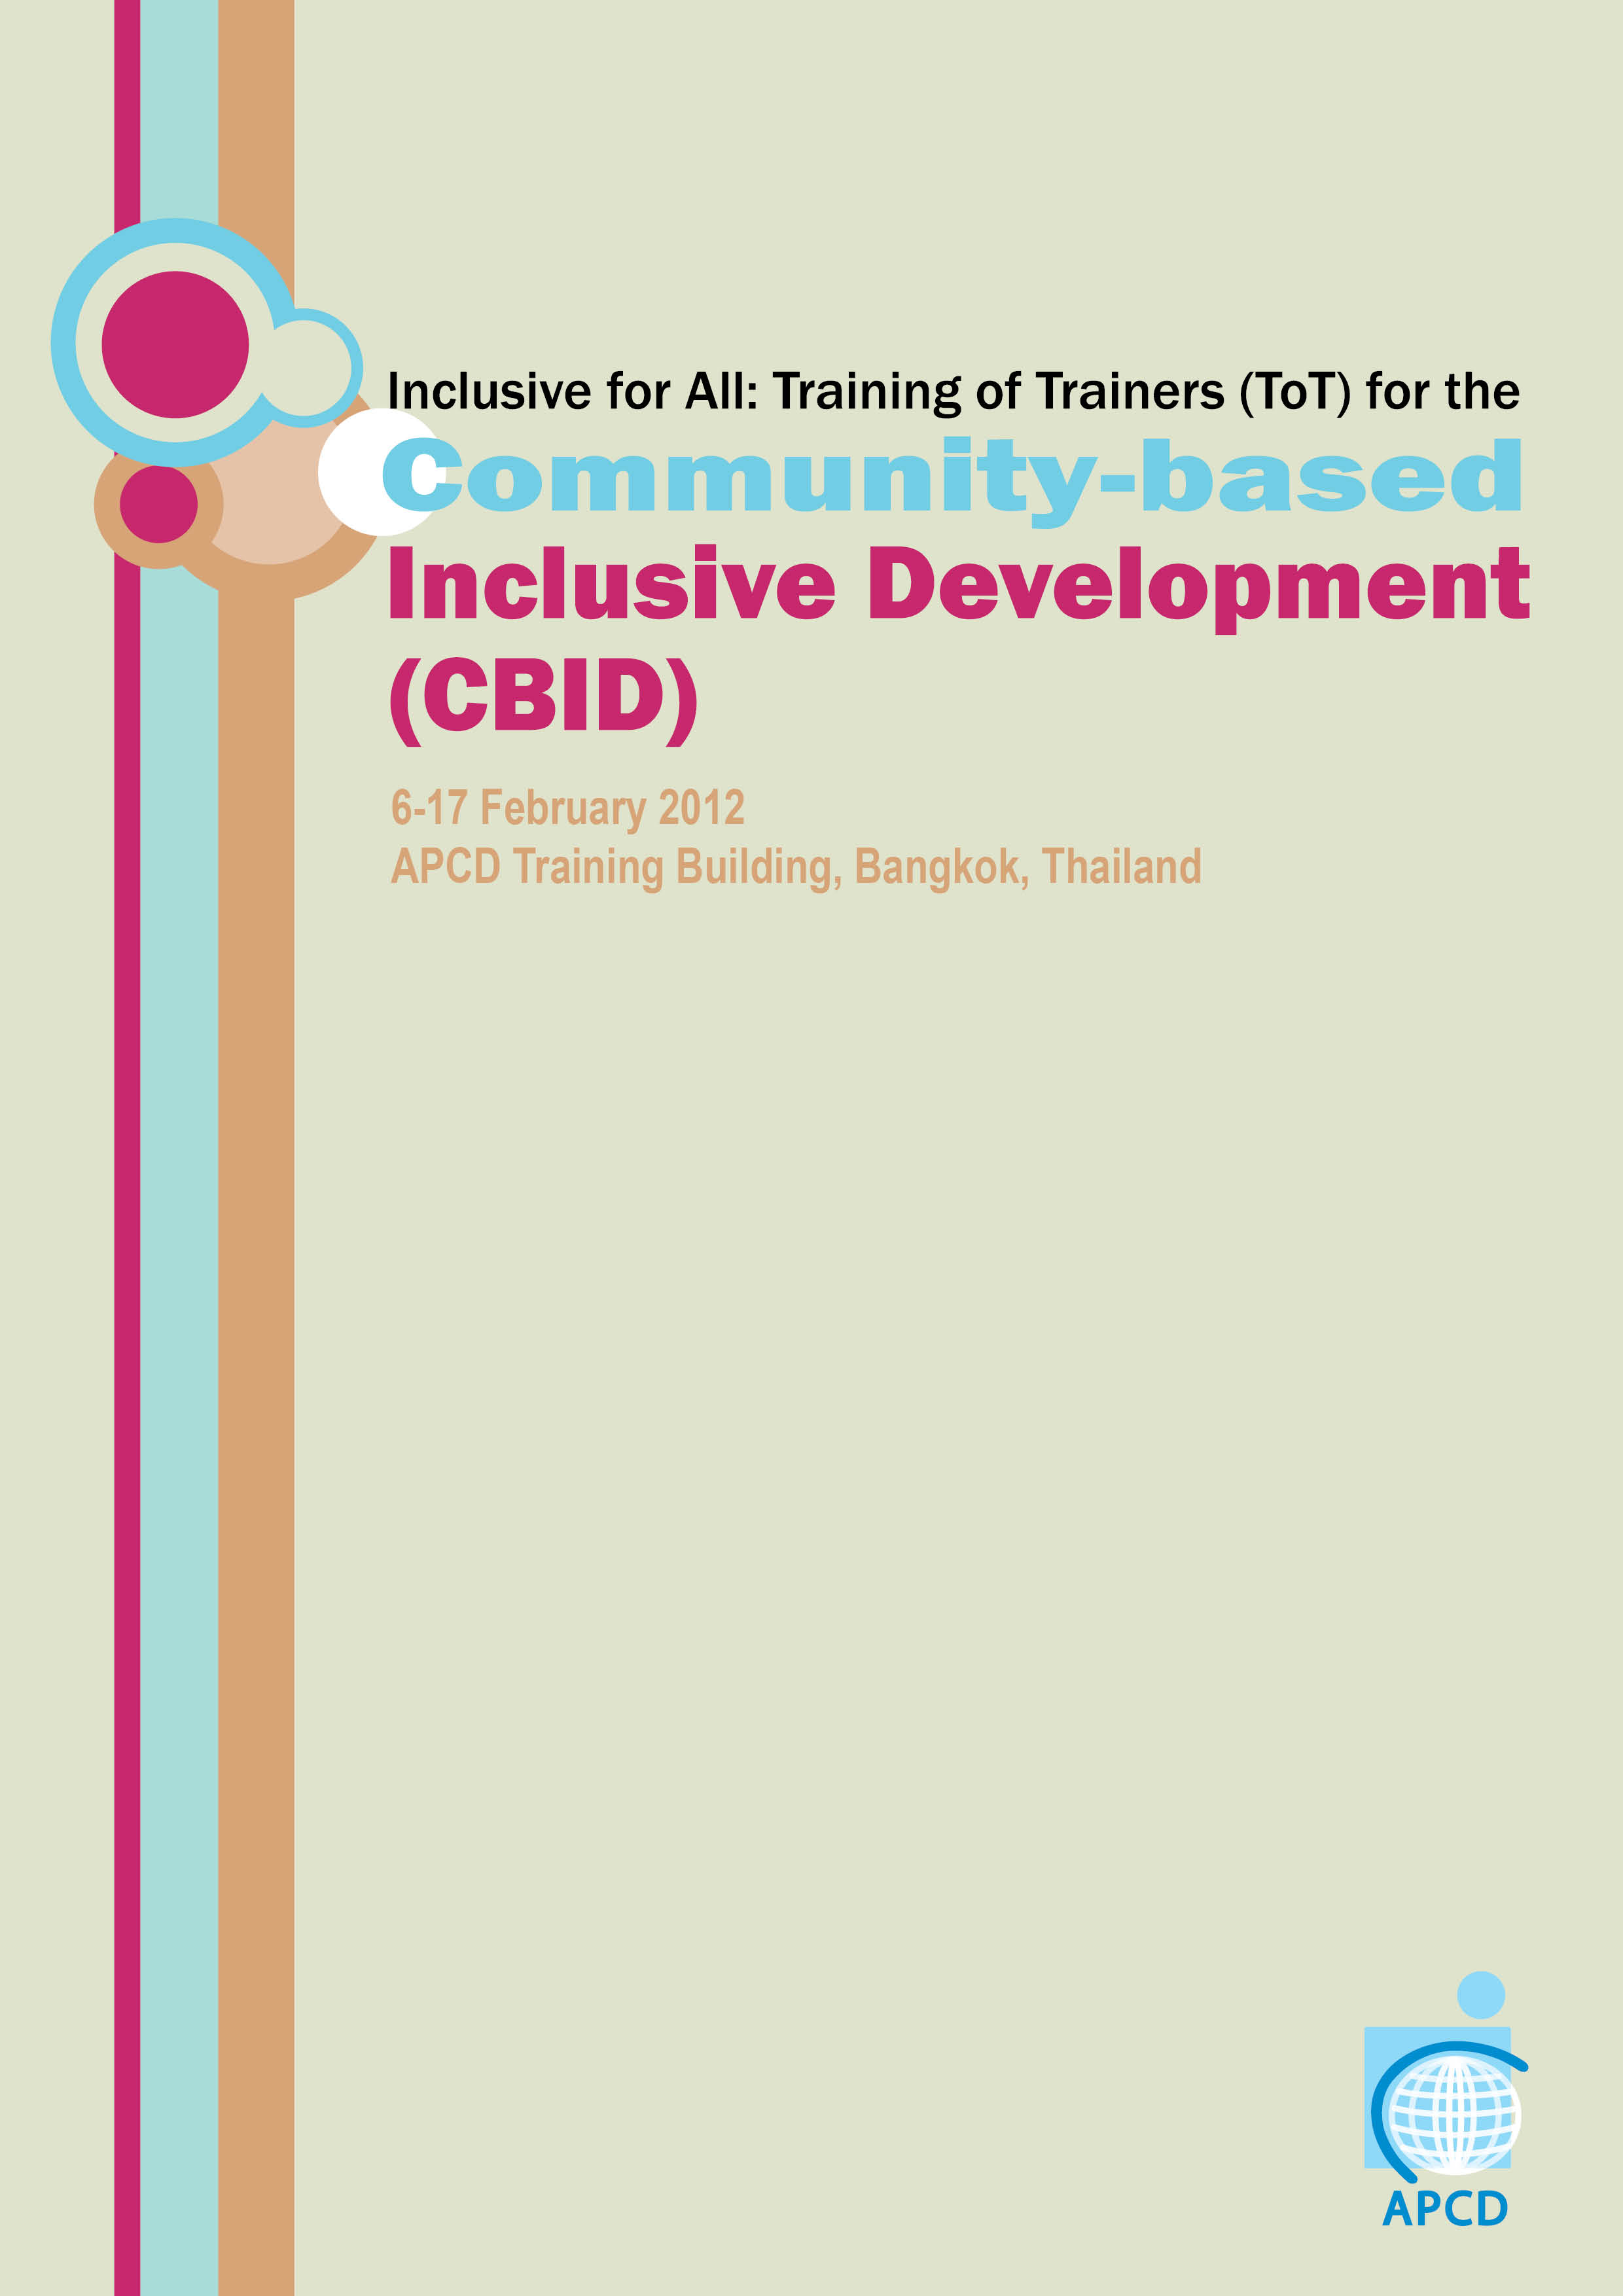 Inclusive for All: Training of Trainers (ToT) for the Community-based Inclusive Development (CBID)